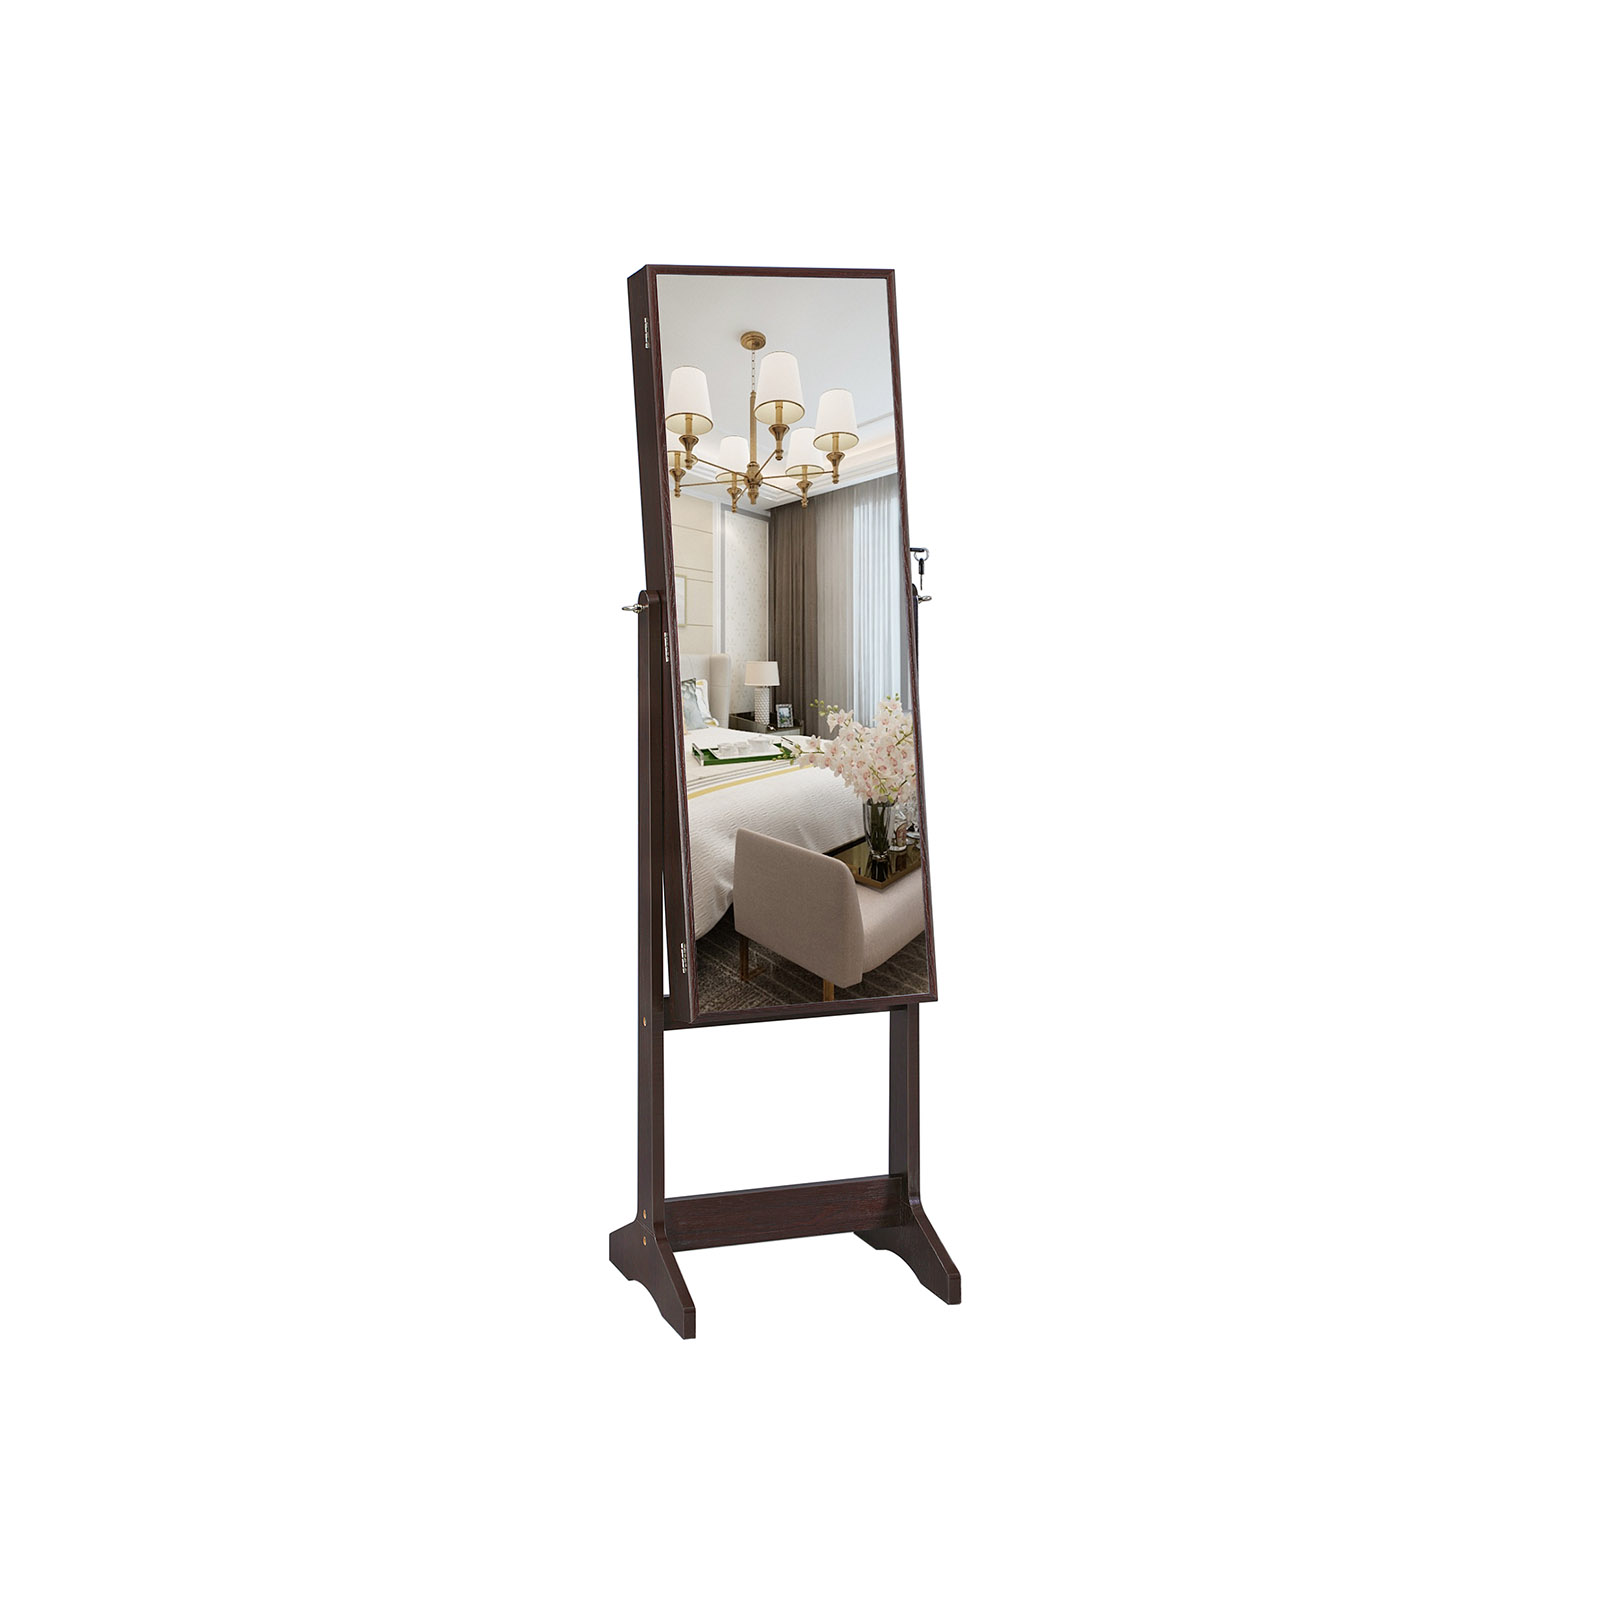 Full Length Mirror Mirror Armoire Standing Mirror SONGMICS Jewellery Cabinet Simple Assembly Brown JJC69BR Gift Idea 